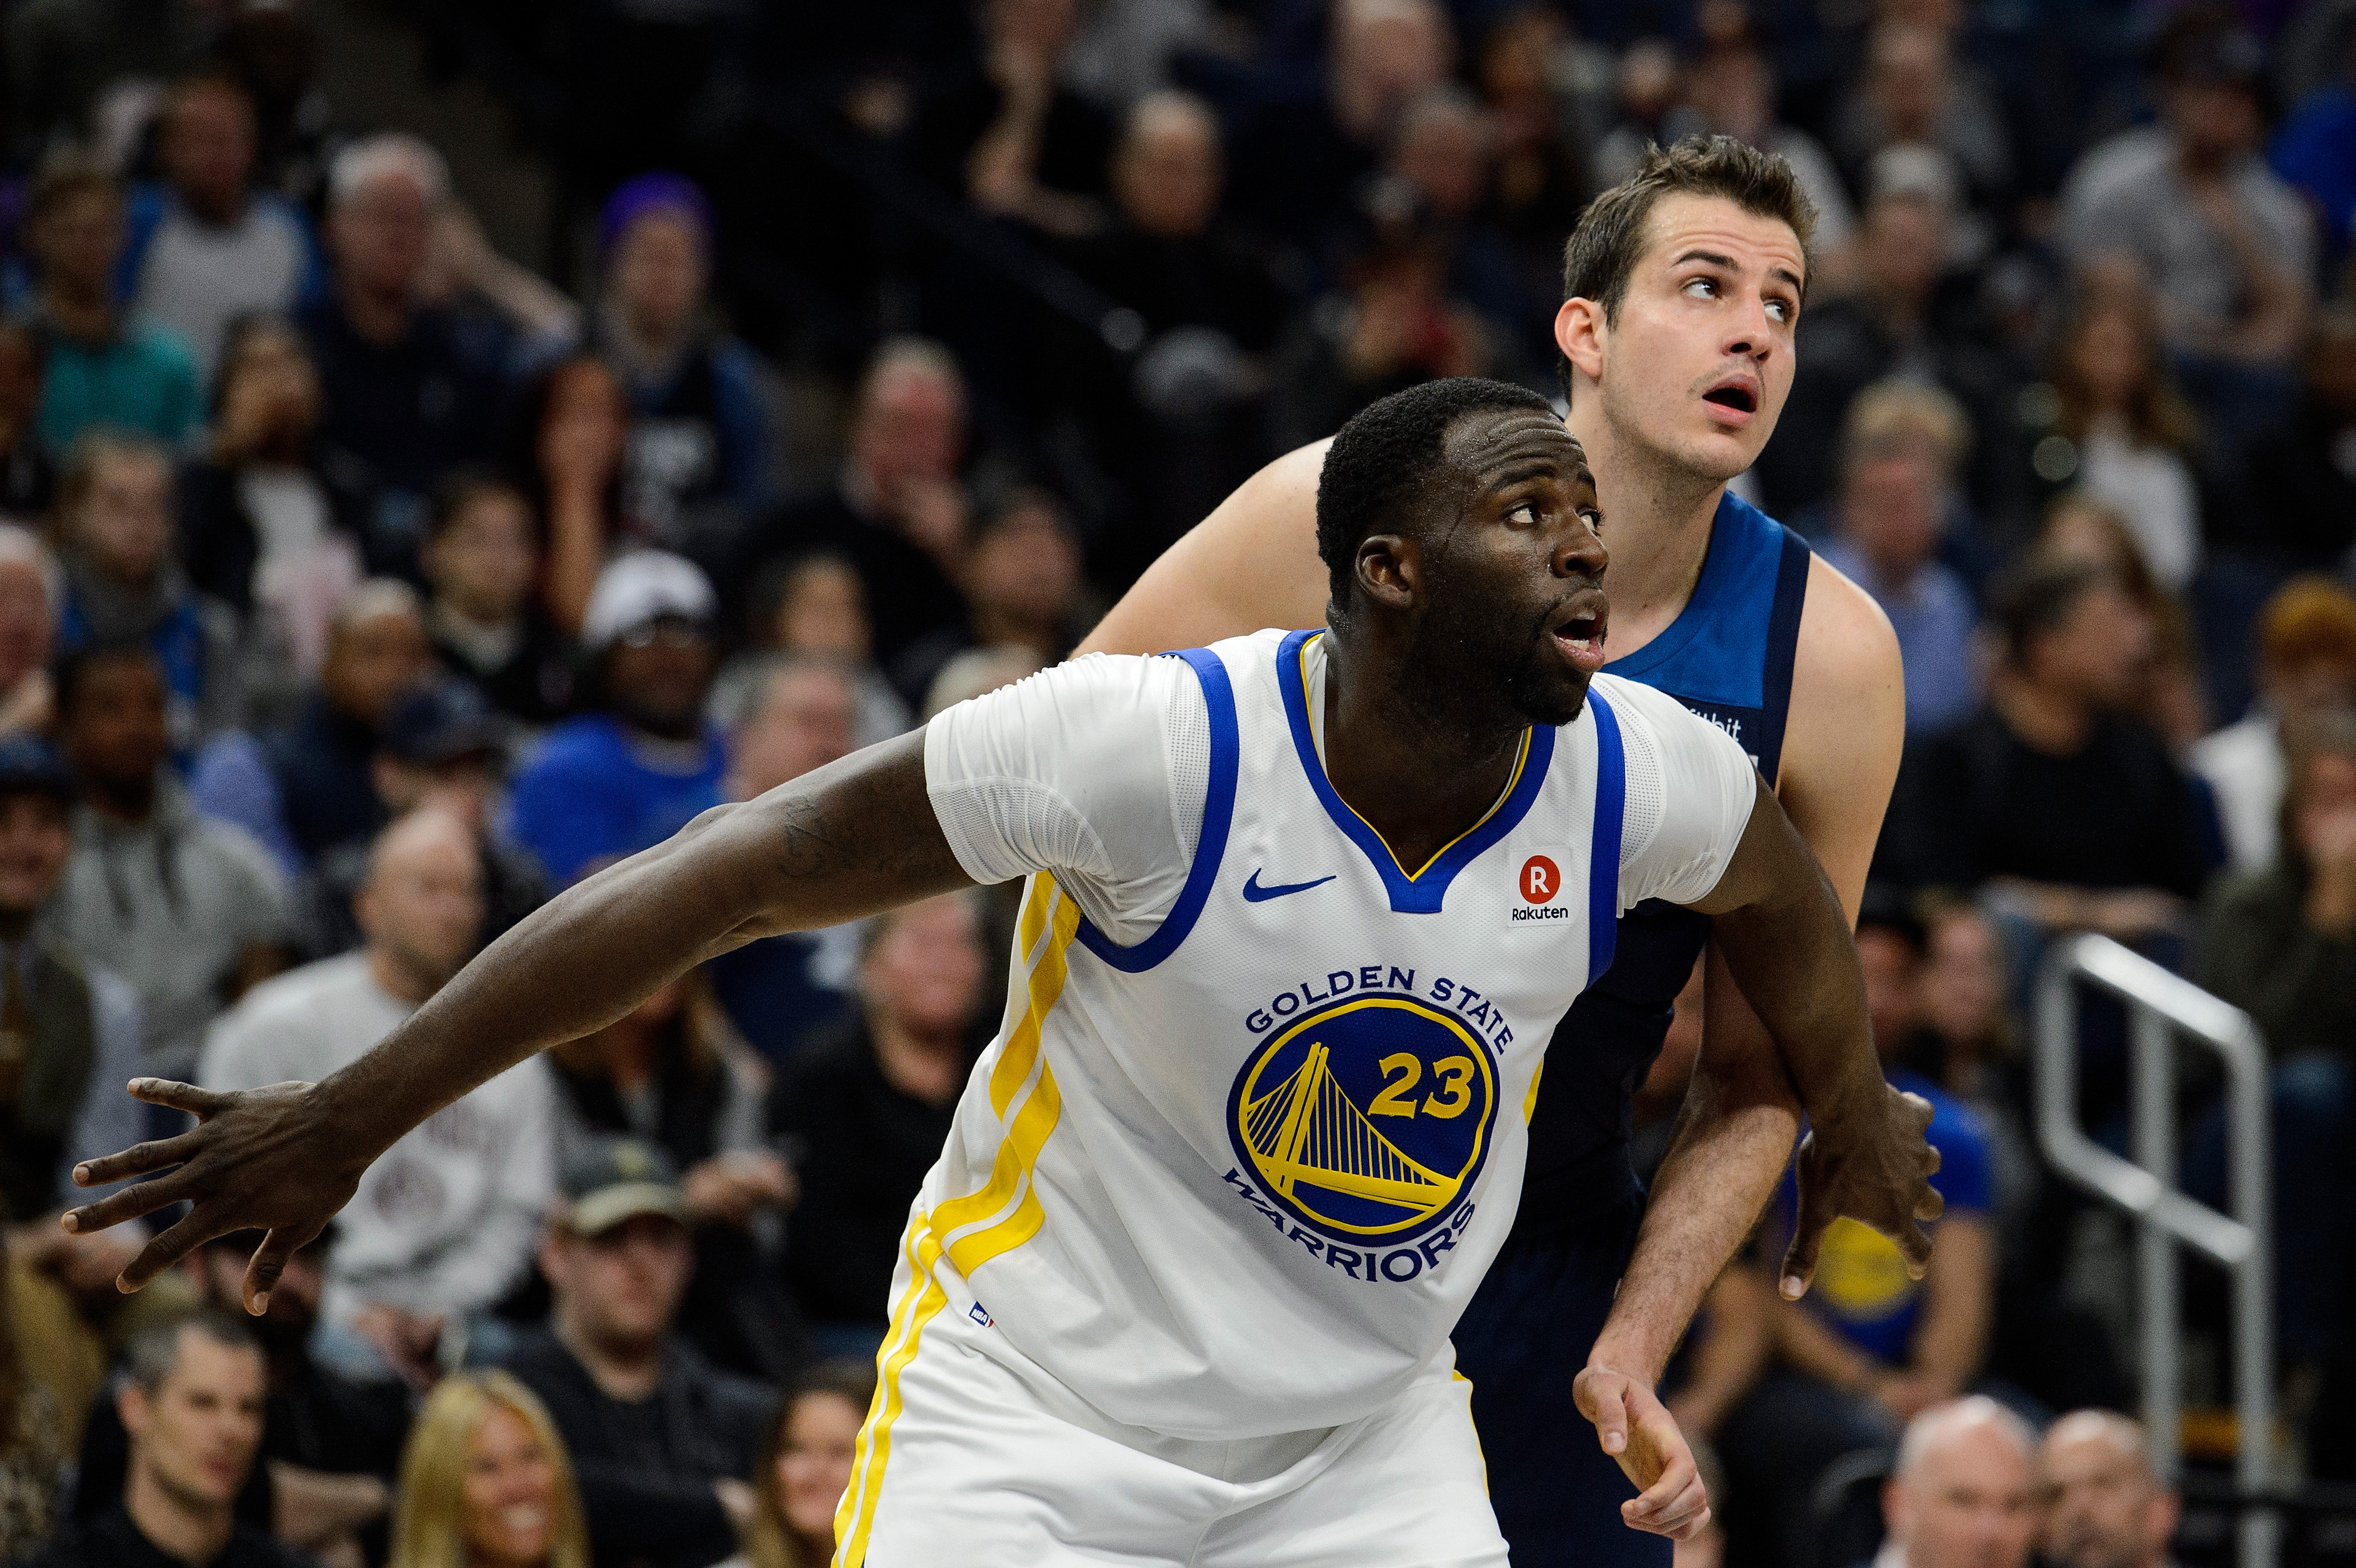 Warriors forward Draymond Green boxes out Nemanja Bjelica during a game in 2018